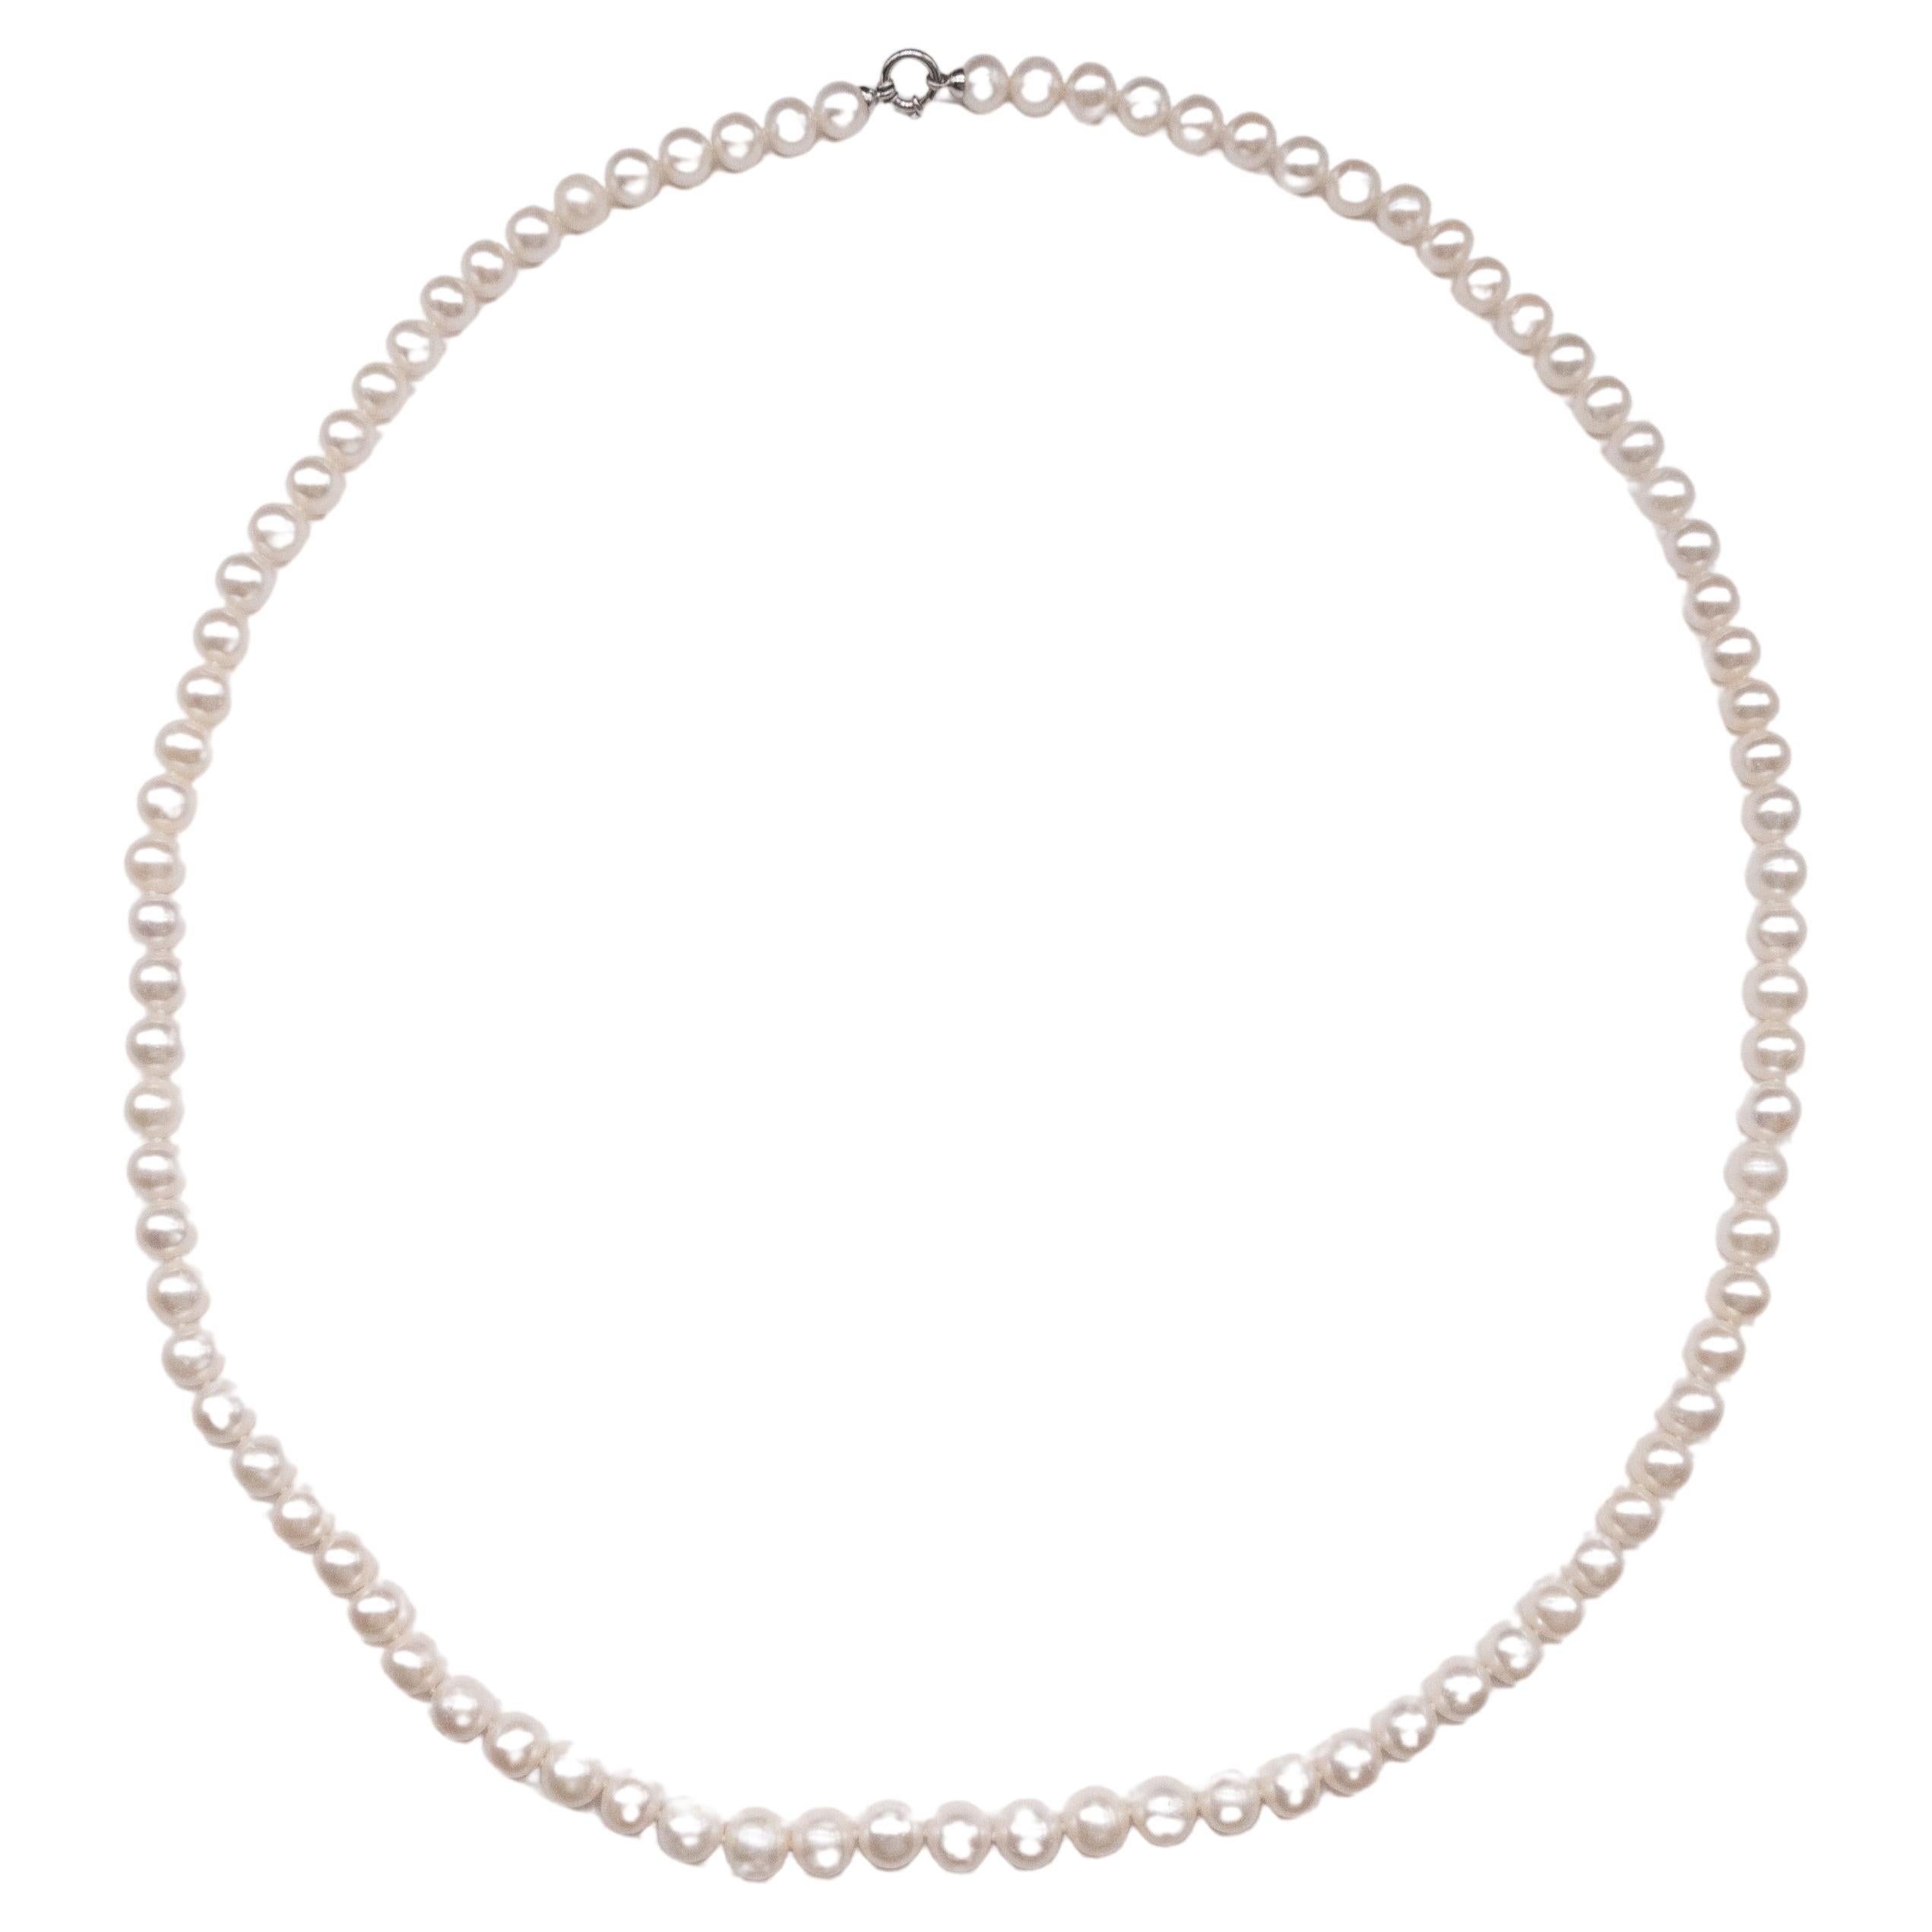 Discover elegance incarnate in our Freshwater (Orient Color) Pearl Necklace. Each pearl, measuring between 9mm and 10mm, is carefully selected to create a harmonious ensemble.

The long necklace can be worn either in its full length or in 2 rounds